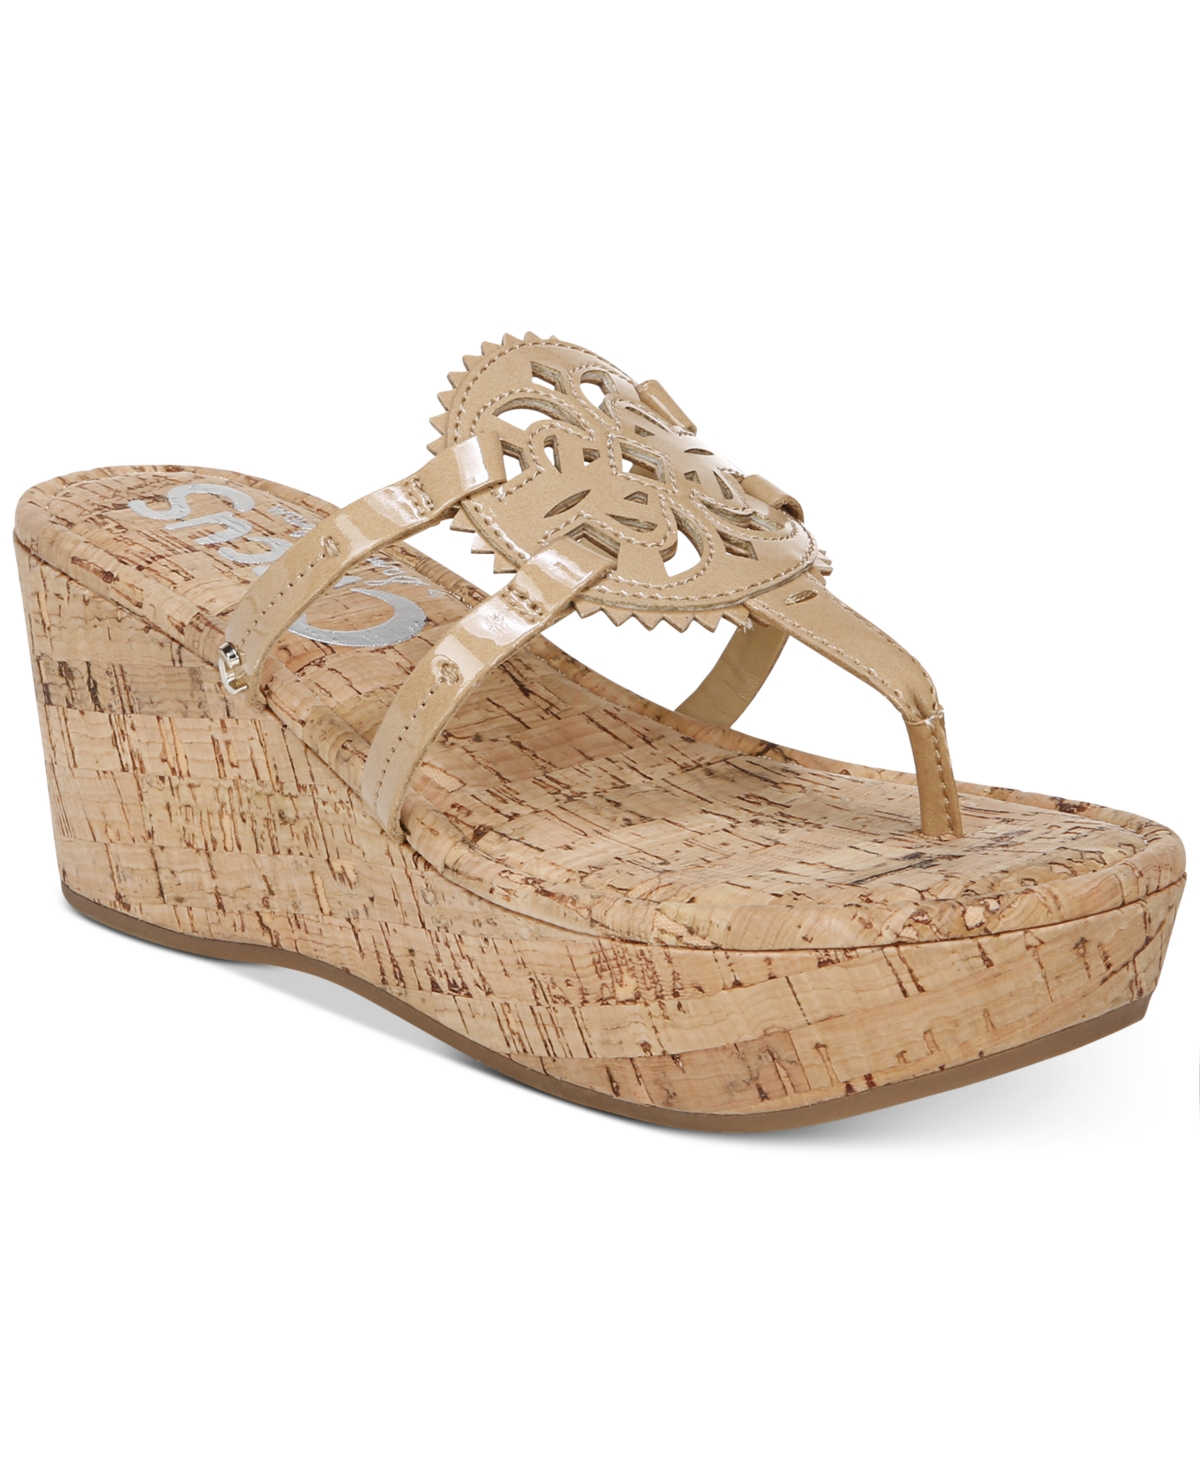 UPC 017114001397 product image for Circus by Sam Edelman Rocky Platform Wedges Women's Shoes | upcitemdb.com